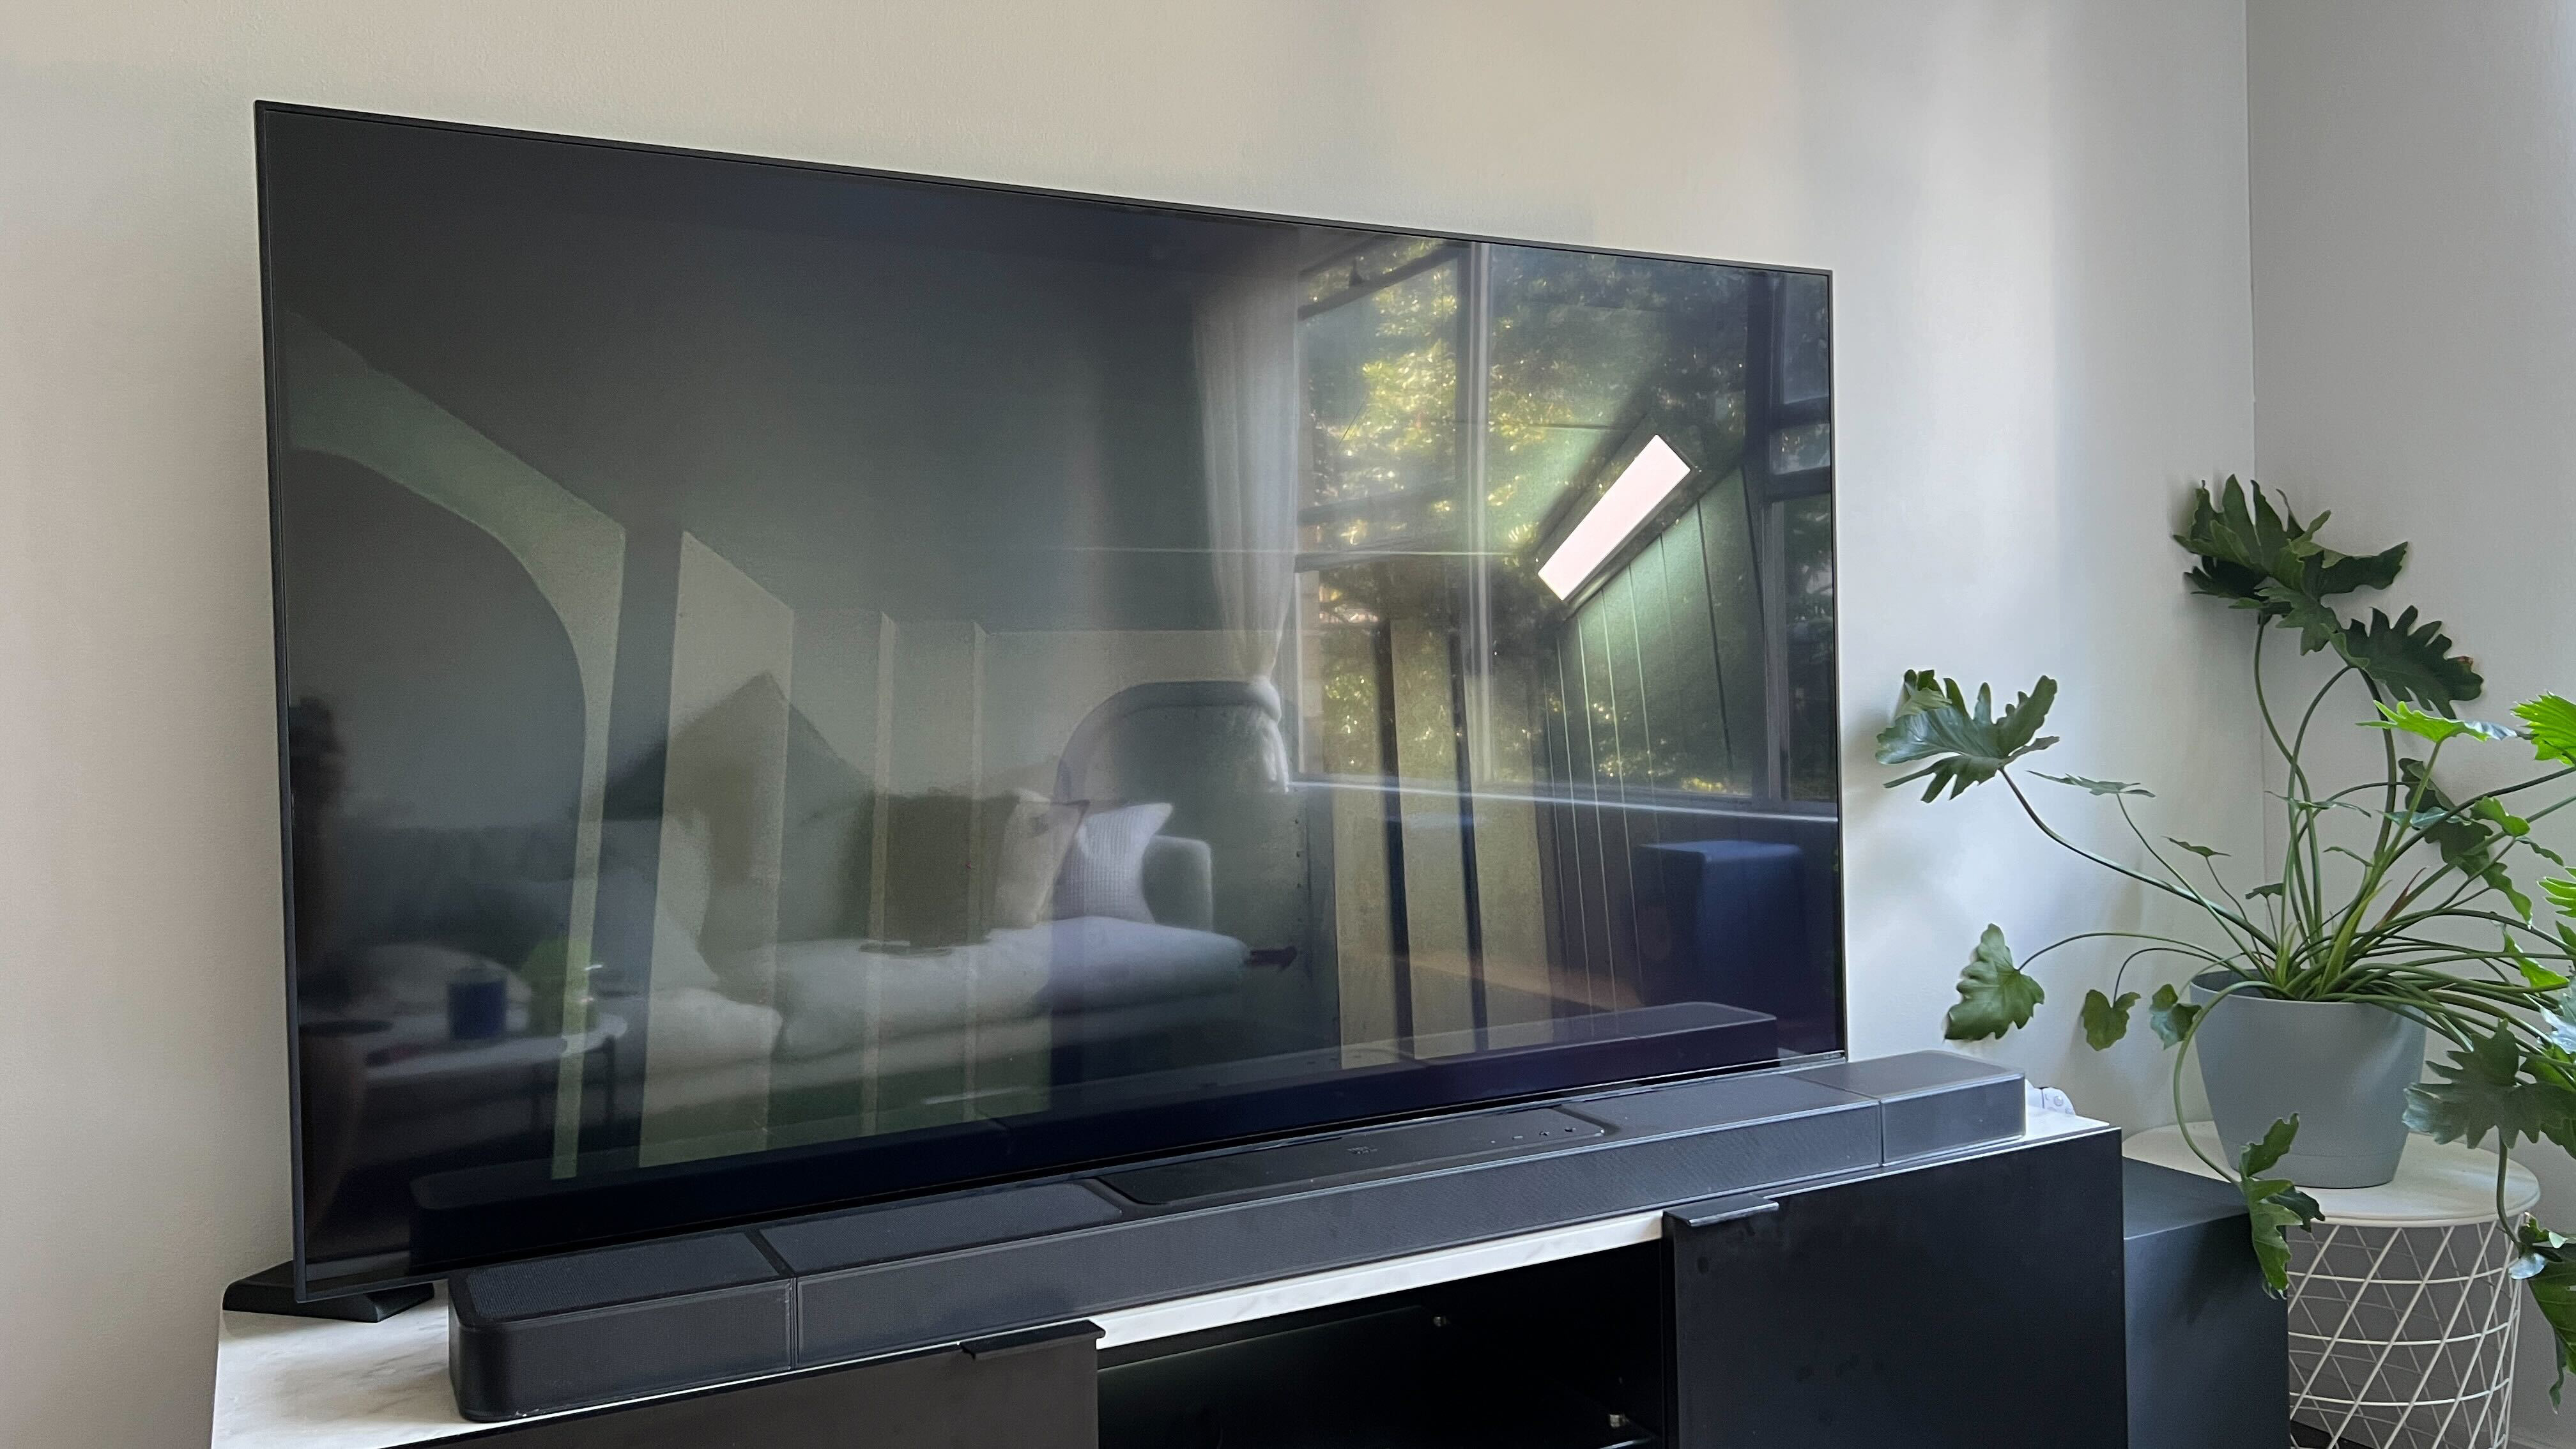 LG QNED81 TV with reflective surface